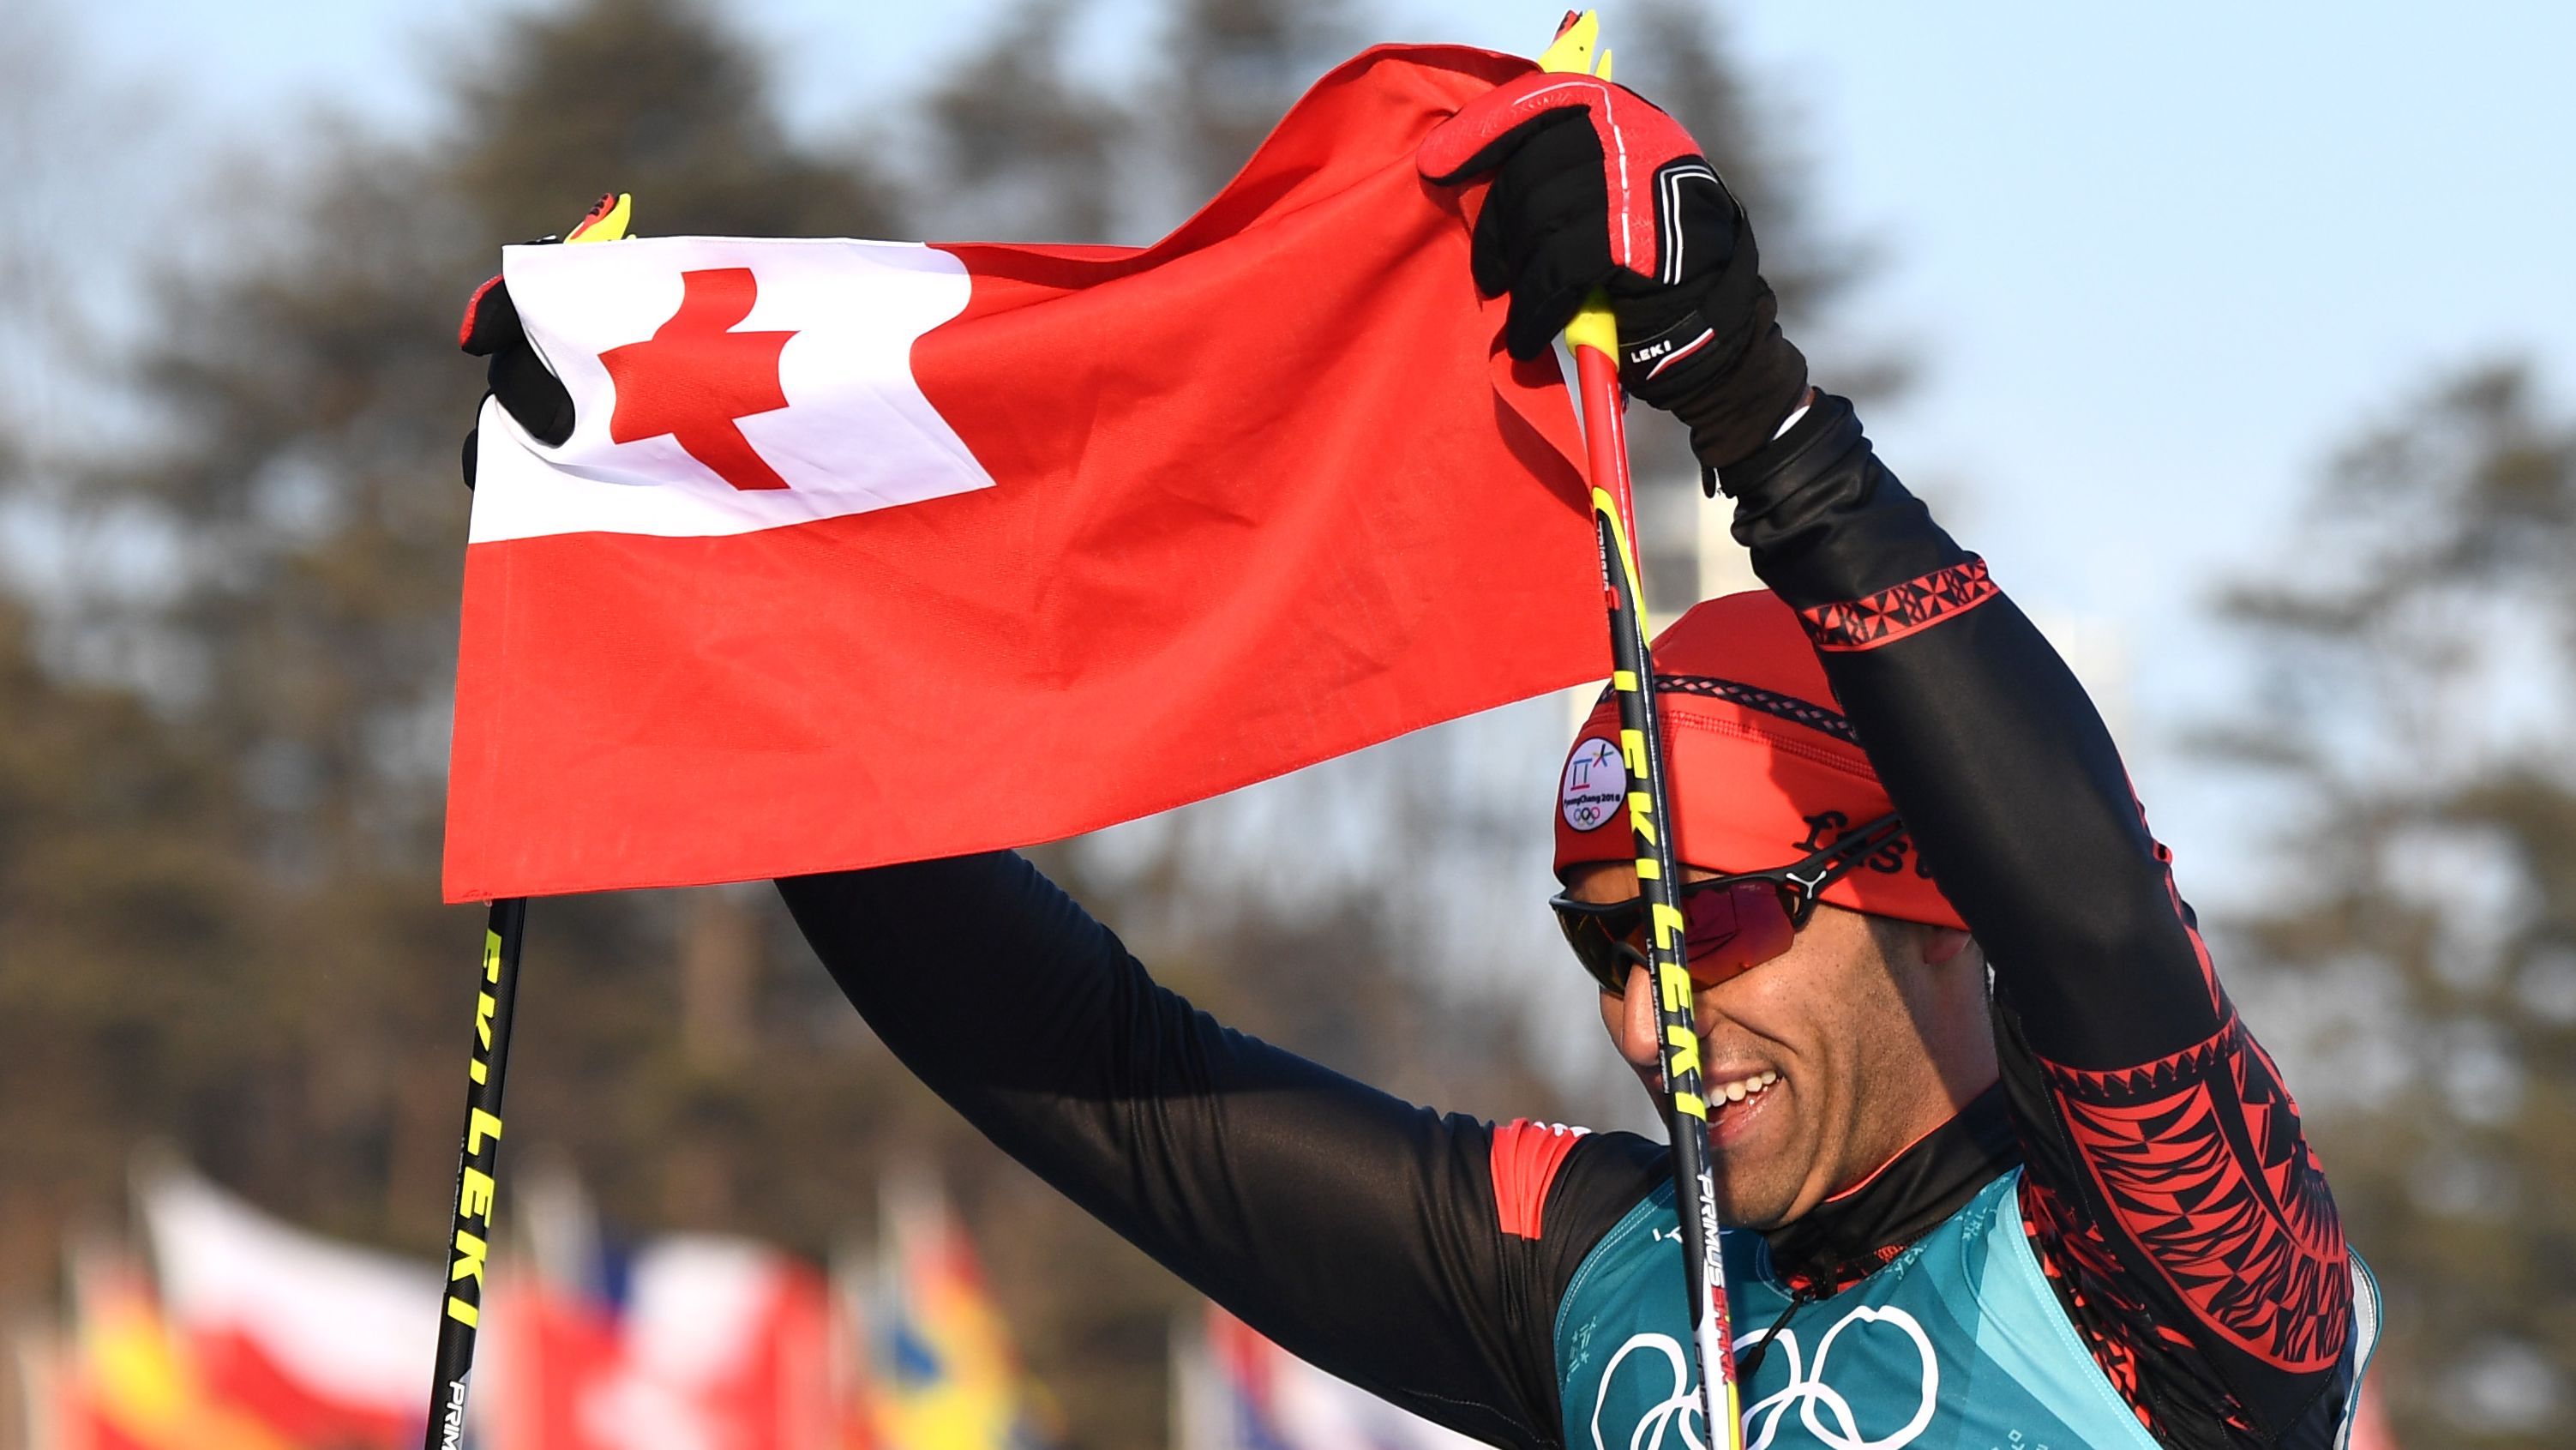 Taufatofua holds up his national flag after his Winter Olympic debut.